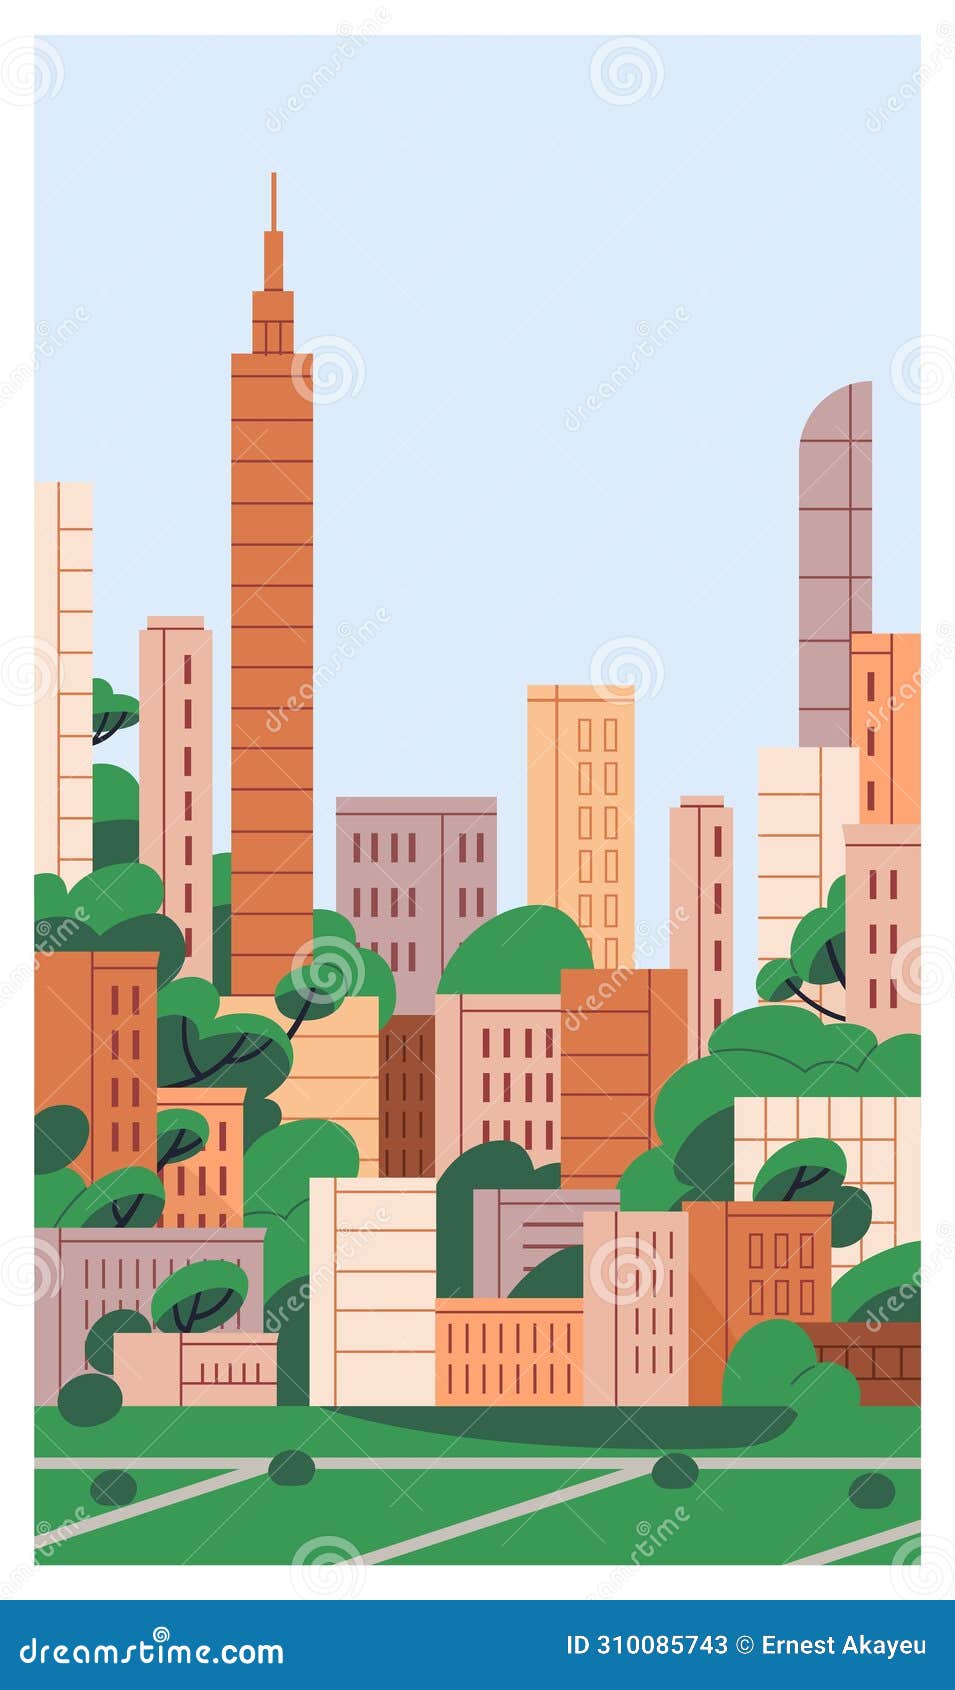 city buildings, urban poster. cityscape, metropolis card. skyscrapers, high multistorey buildings architecture and green